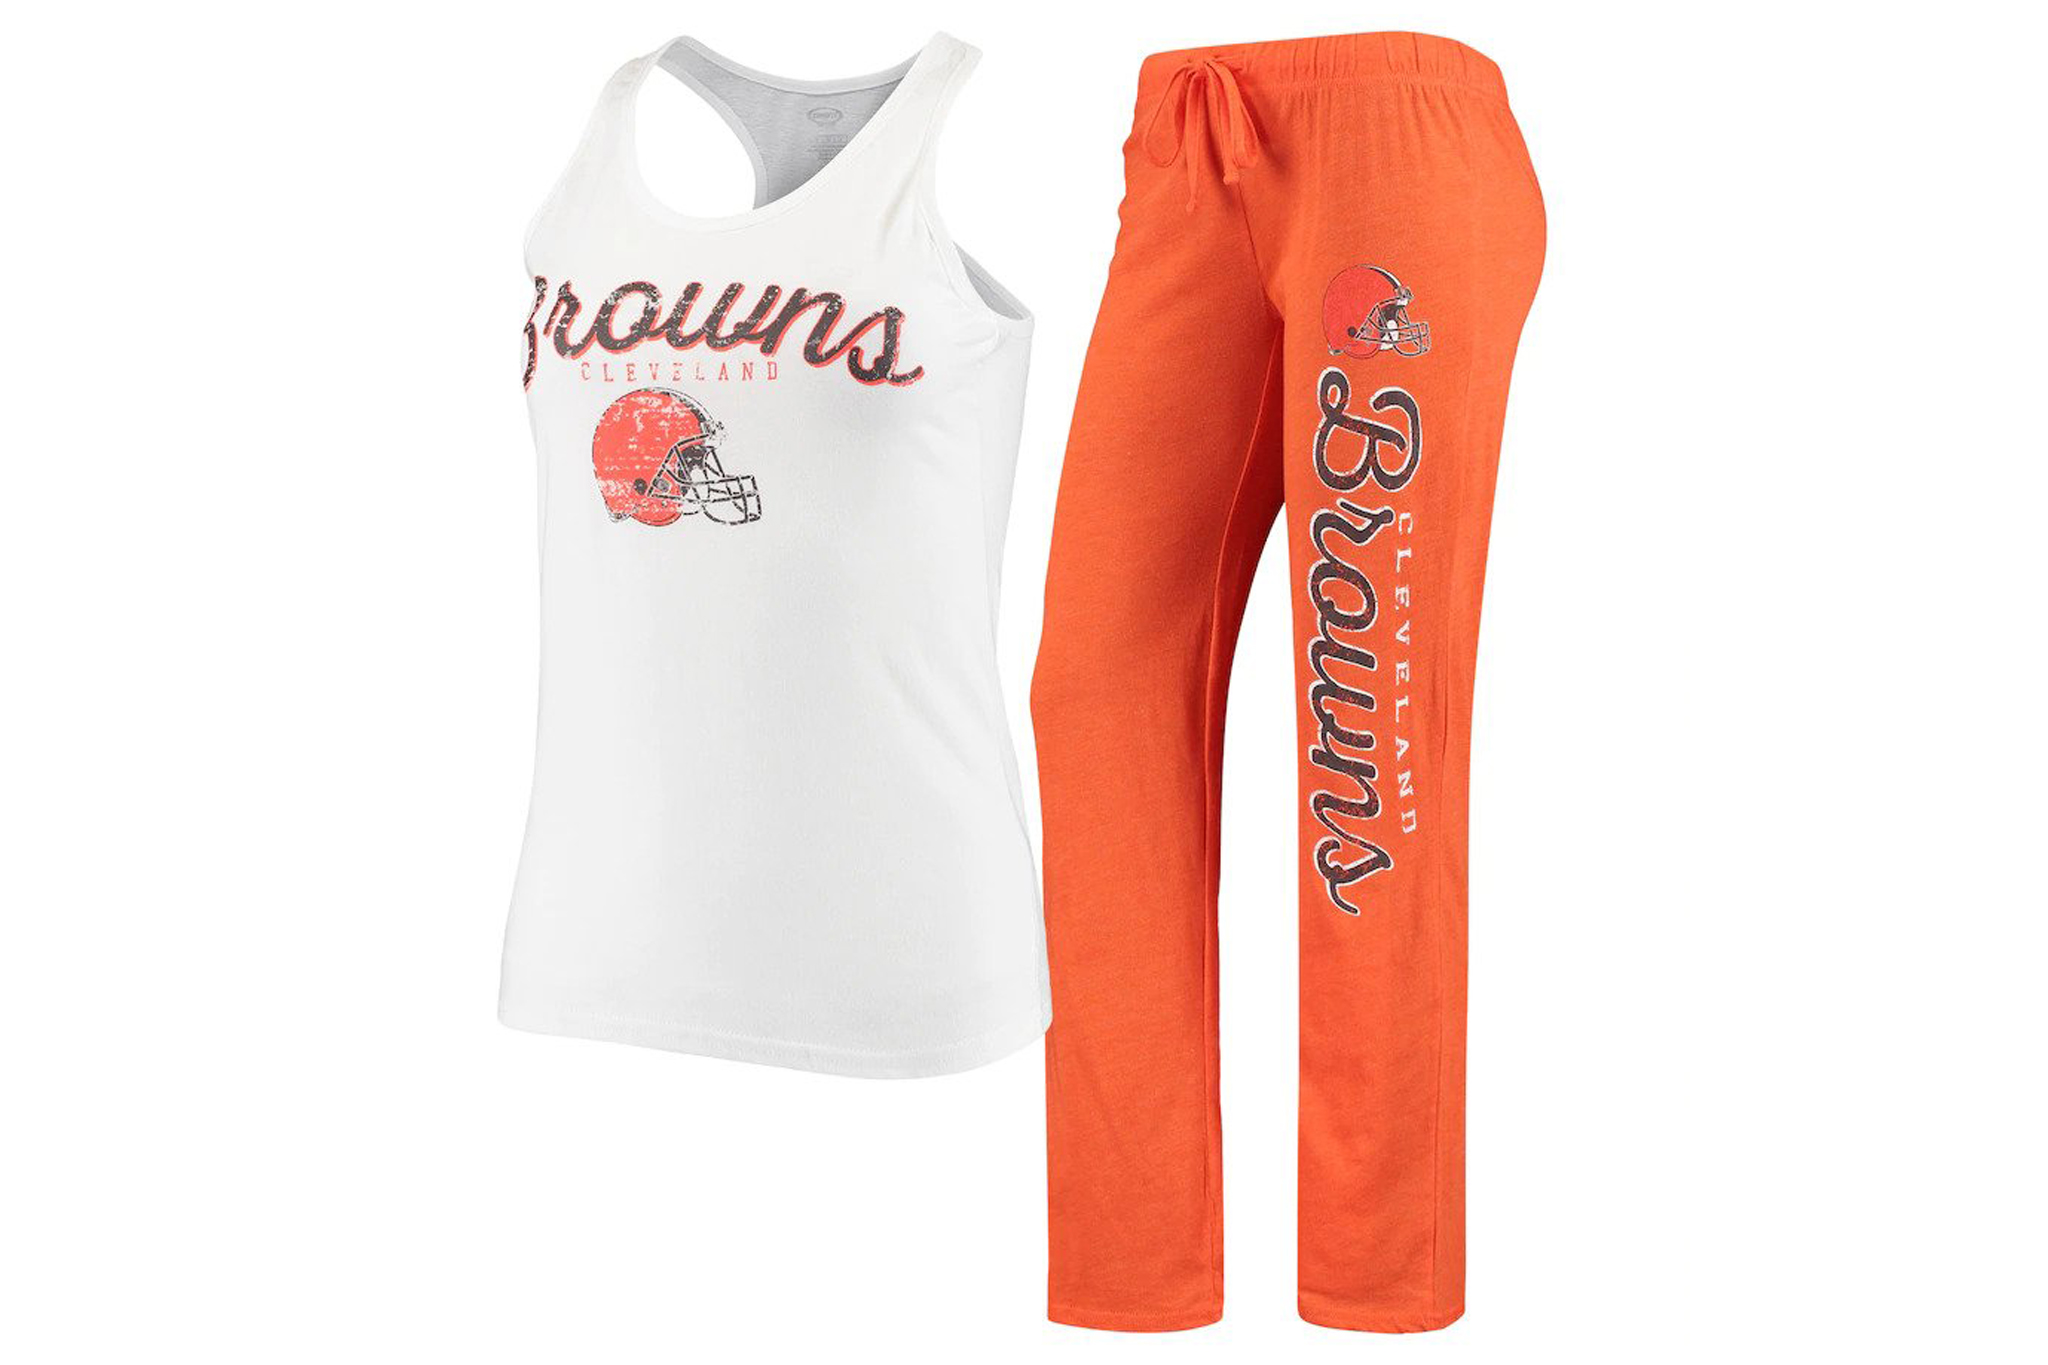 Cleveland Browns gear from last season 